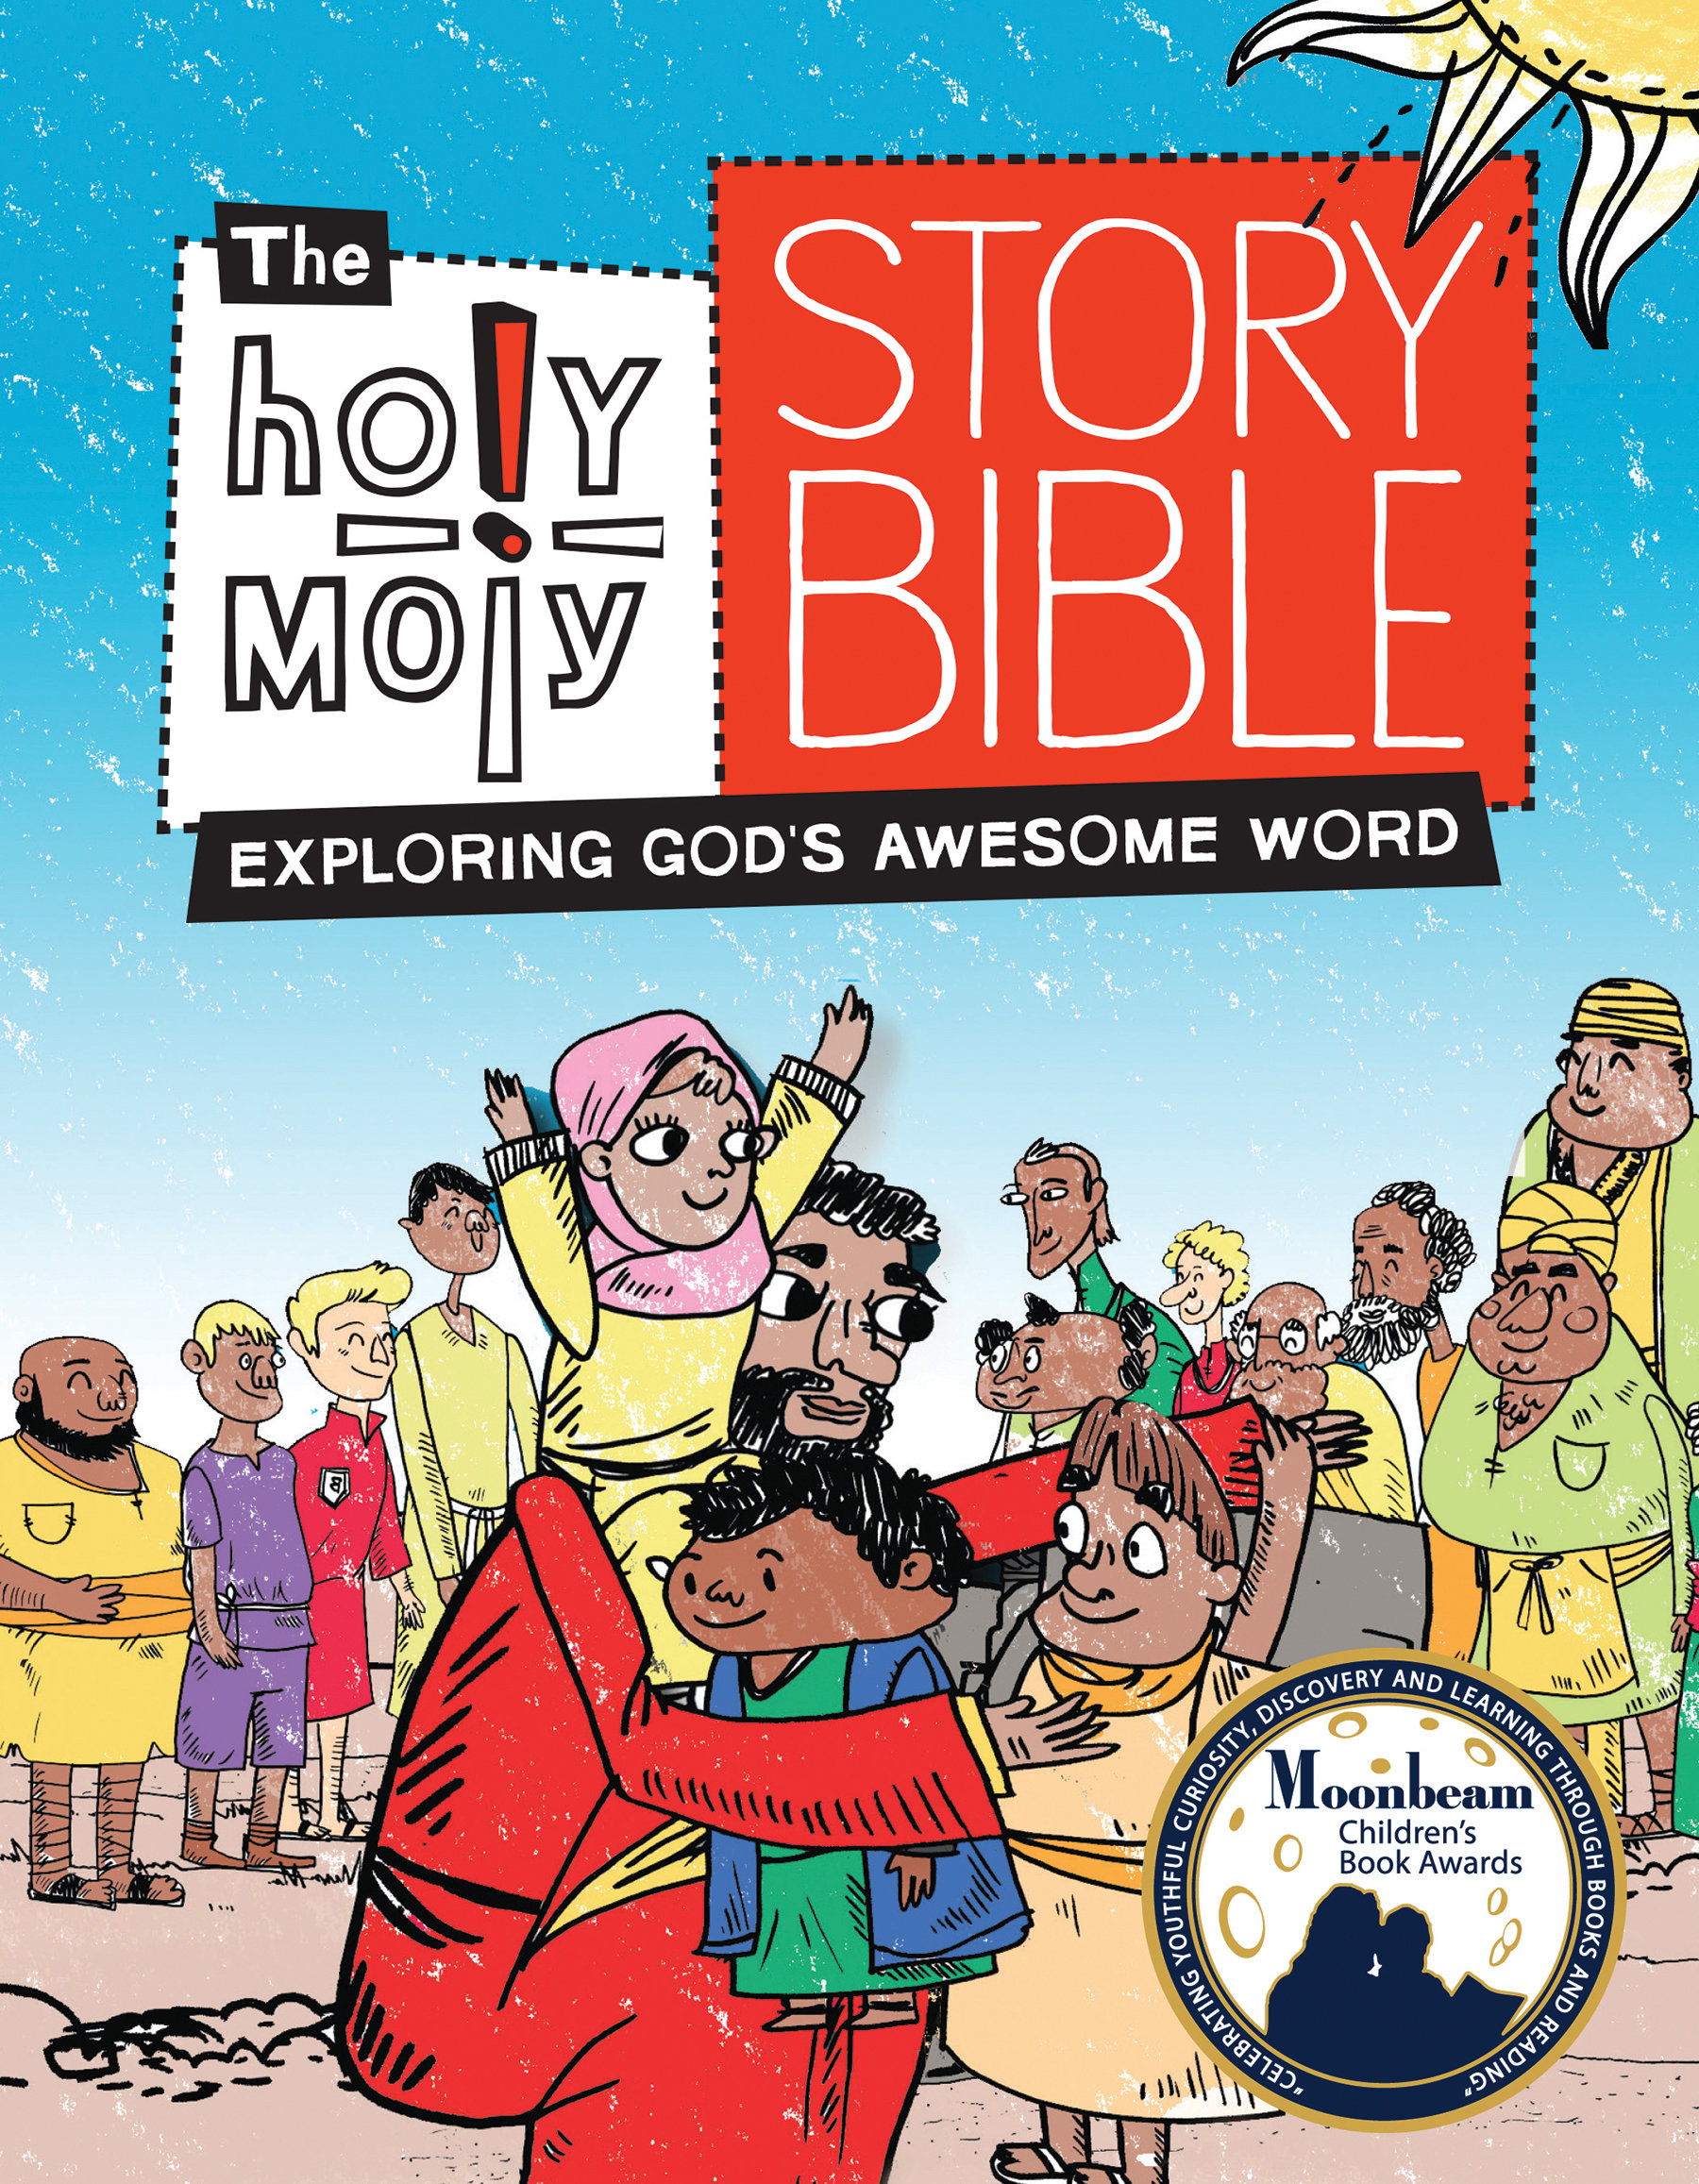 The Holy Moly Story Bible: Exploring God's Awesome Word, Family Edition